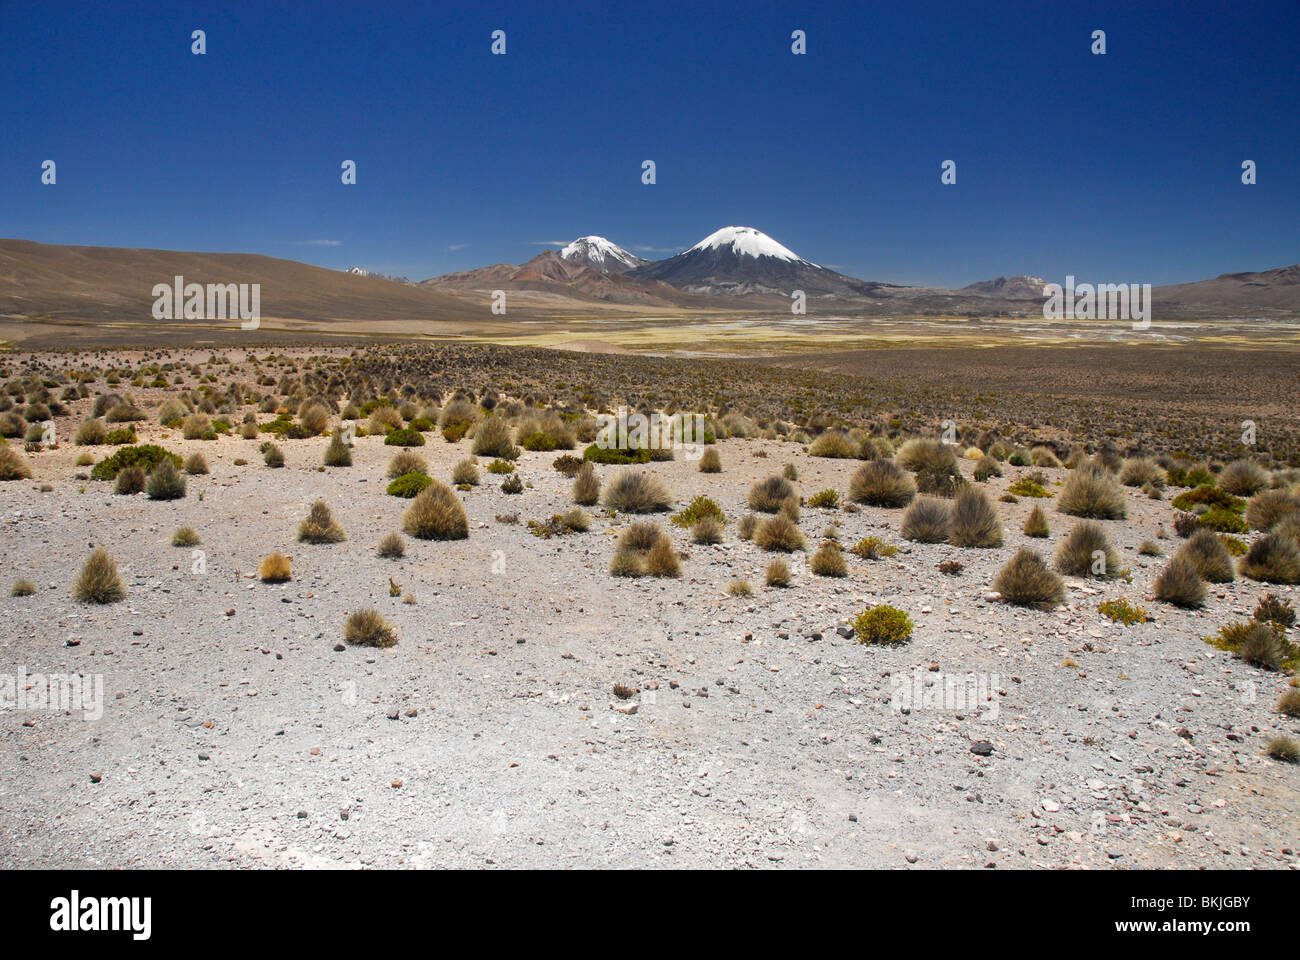 Volcano Parinacota and Pomerape, Payachata twin peaks as seen from the Altiplano, Lauca National Park, Chile, South America Stock Photo